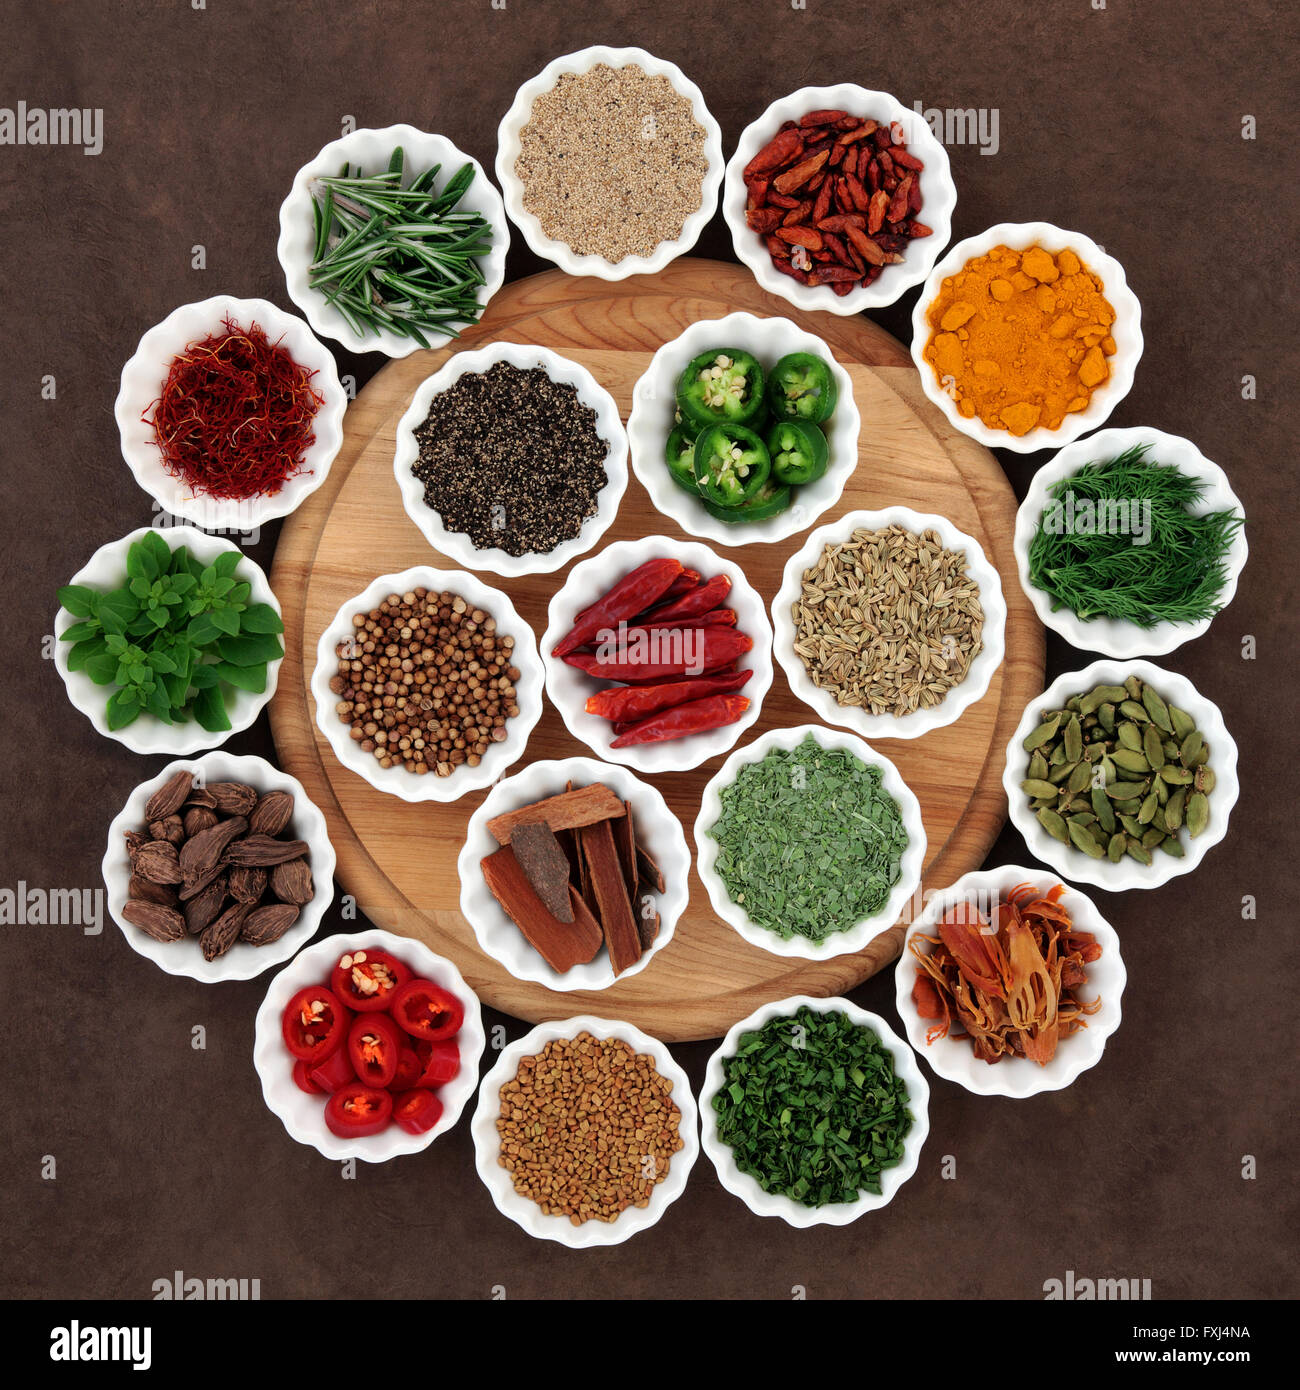 Large herb and spice selection in porcelain crinkle bowls on wooden board. Stock Photo